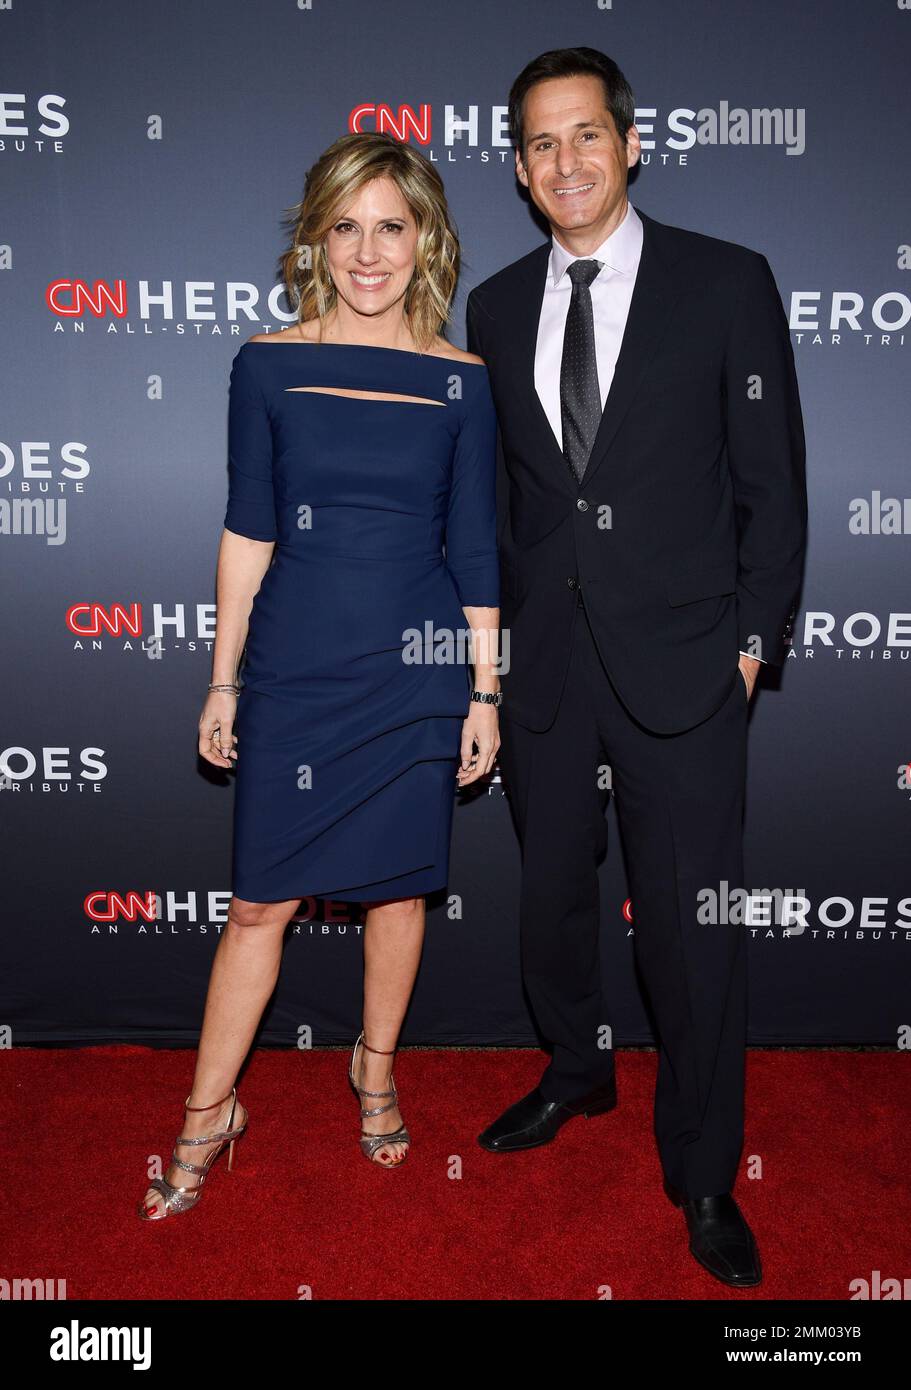 CNN anchors Alisyn Camerota, left, and John Berman attend the 12th annual  CNN Heroes: An All-Star Tribute at the American Museum of Natural History  on Sunday, Dec. 9, 2018, in New York. (